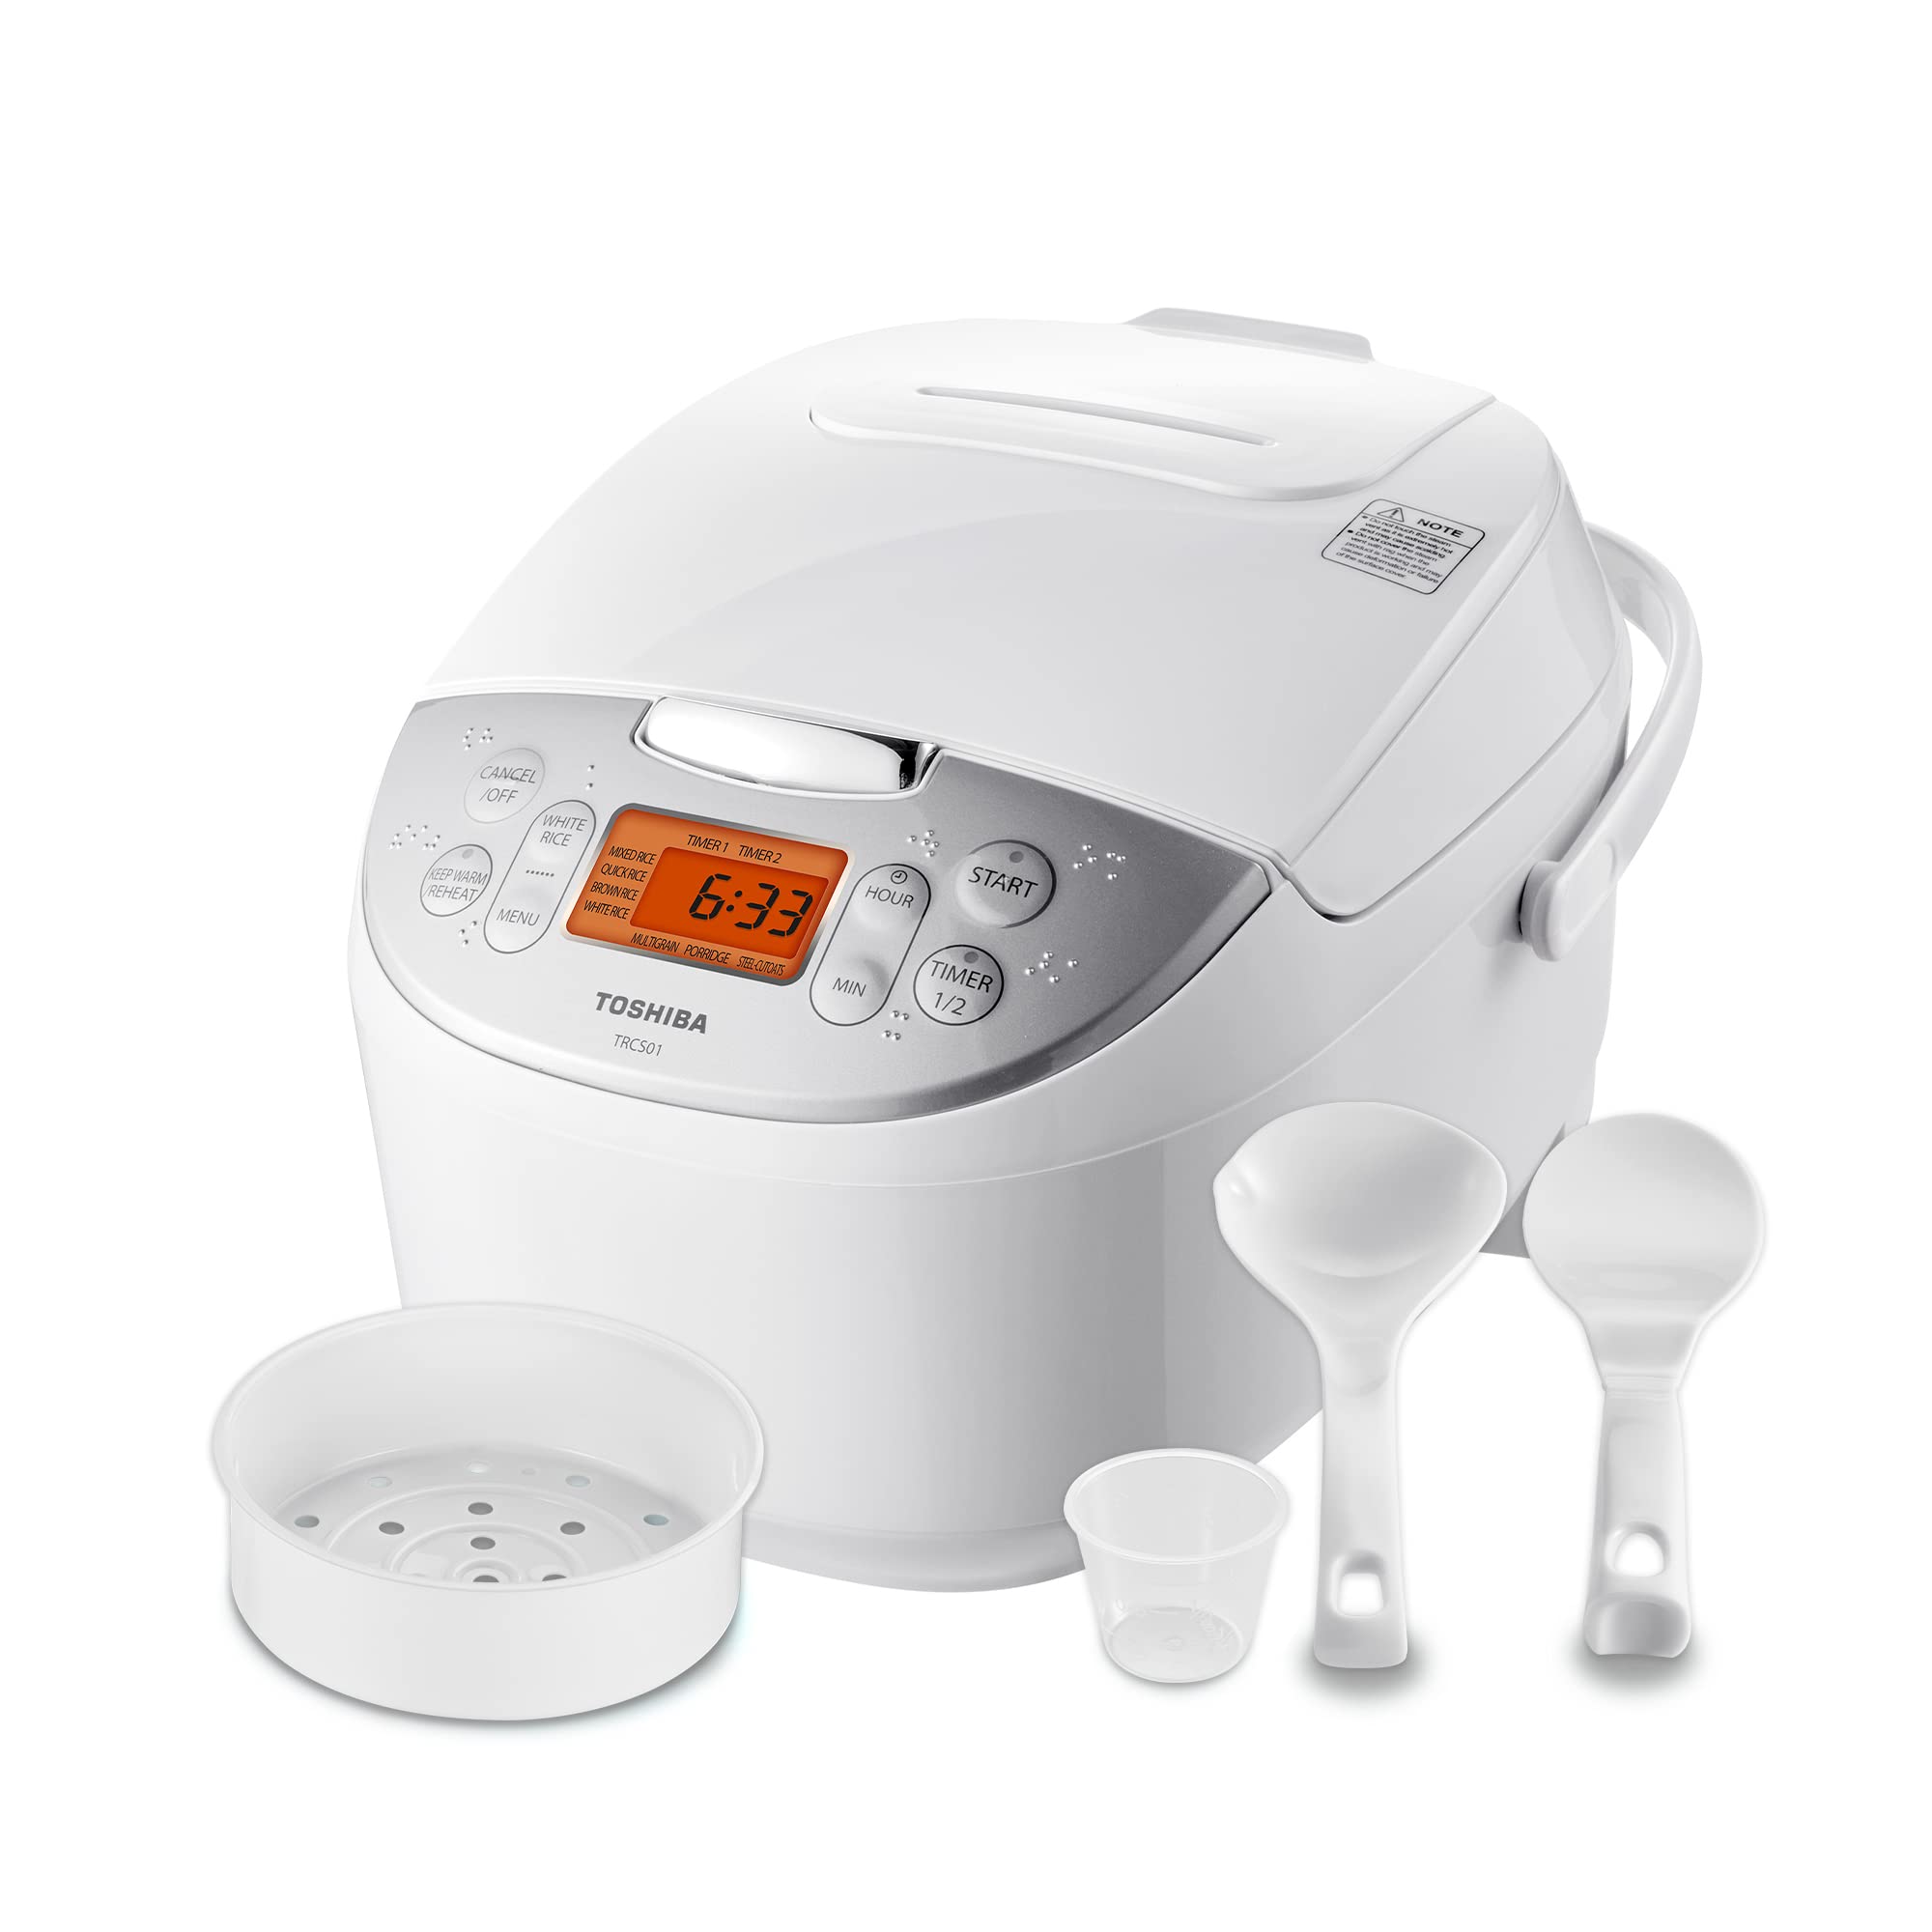 Toshiba Rice Cooker 6 Cup Uncooked – Rice Maker Cooker with Fuzzy Logic Technology, 7 Cooking Functions, Digital Display, Non-Stick Inner Pot, White $114.75